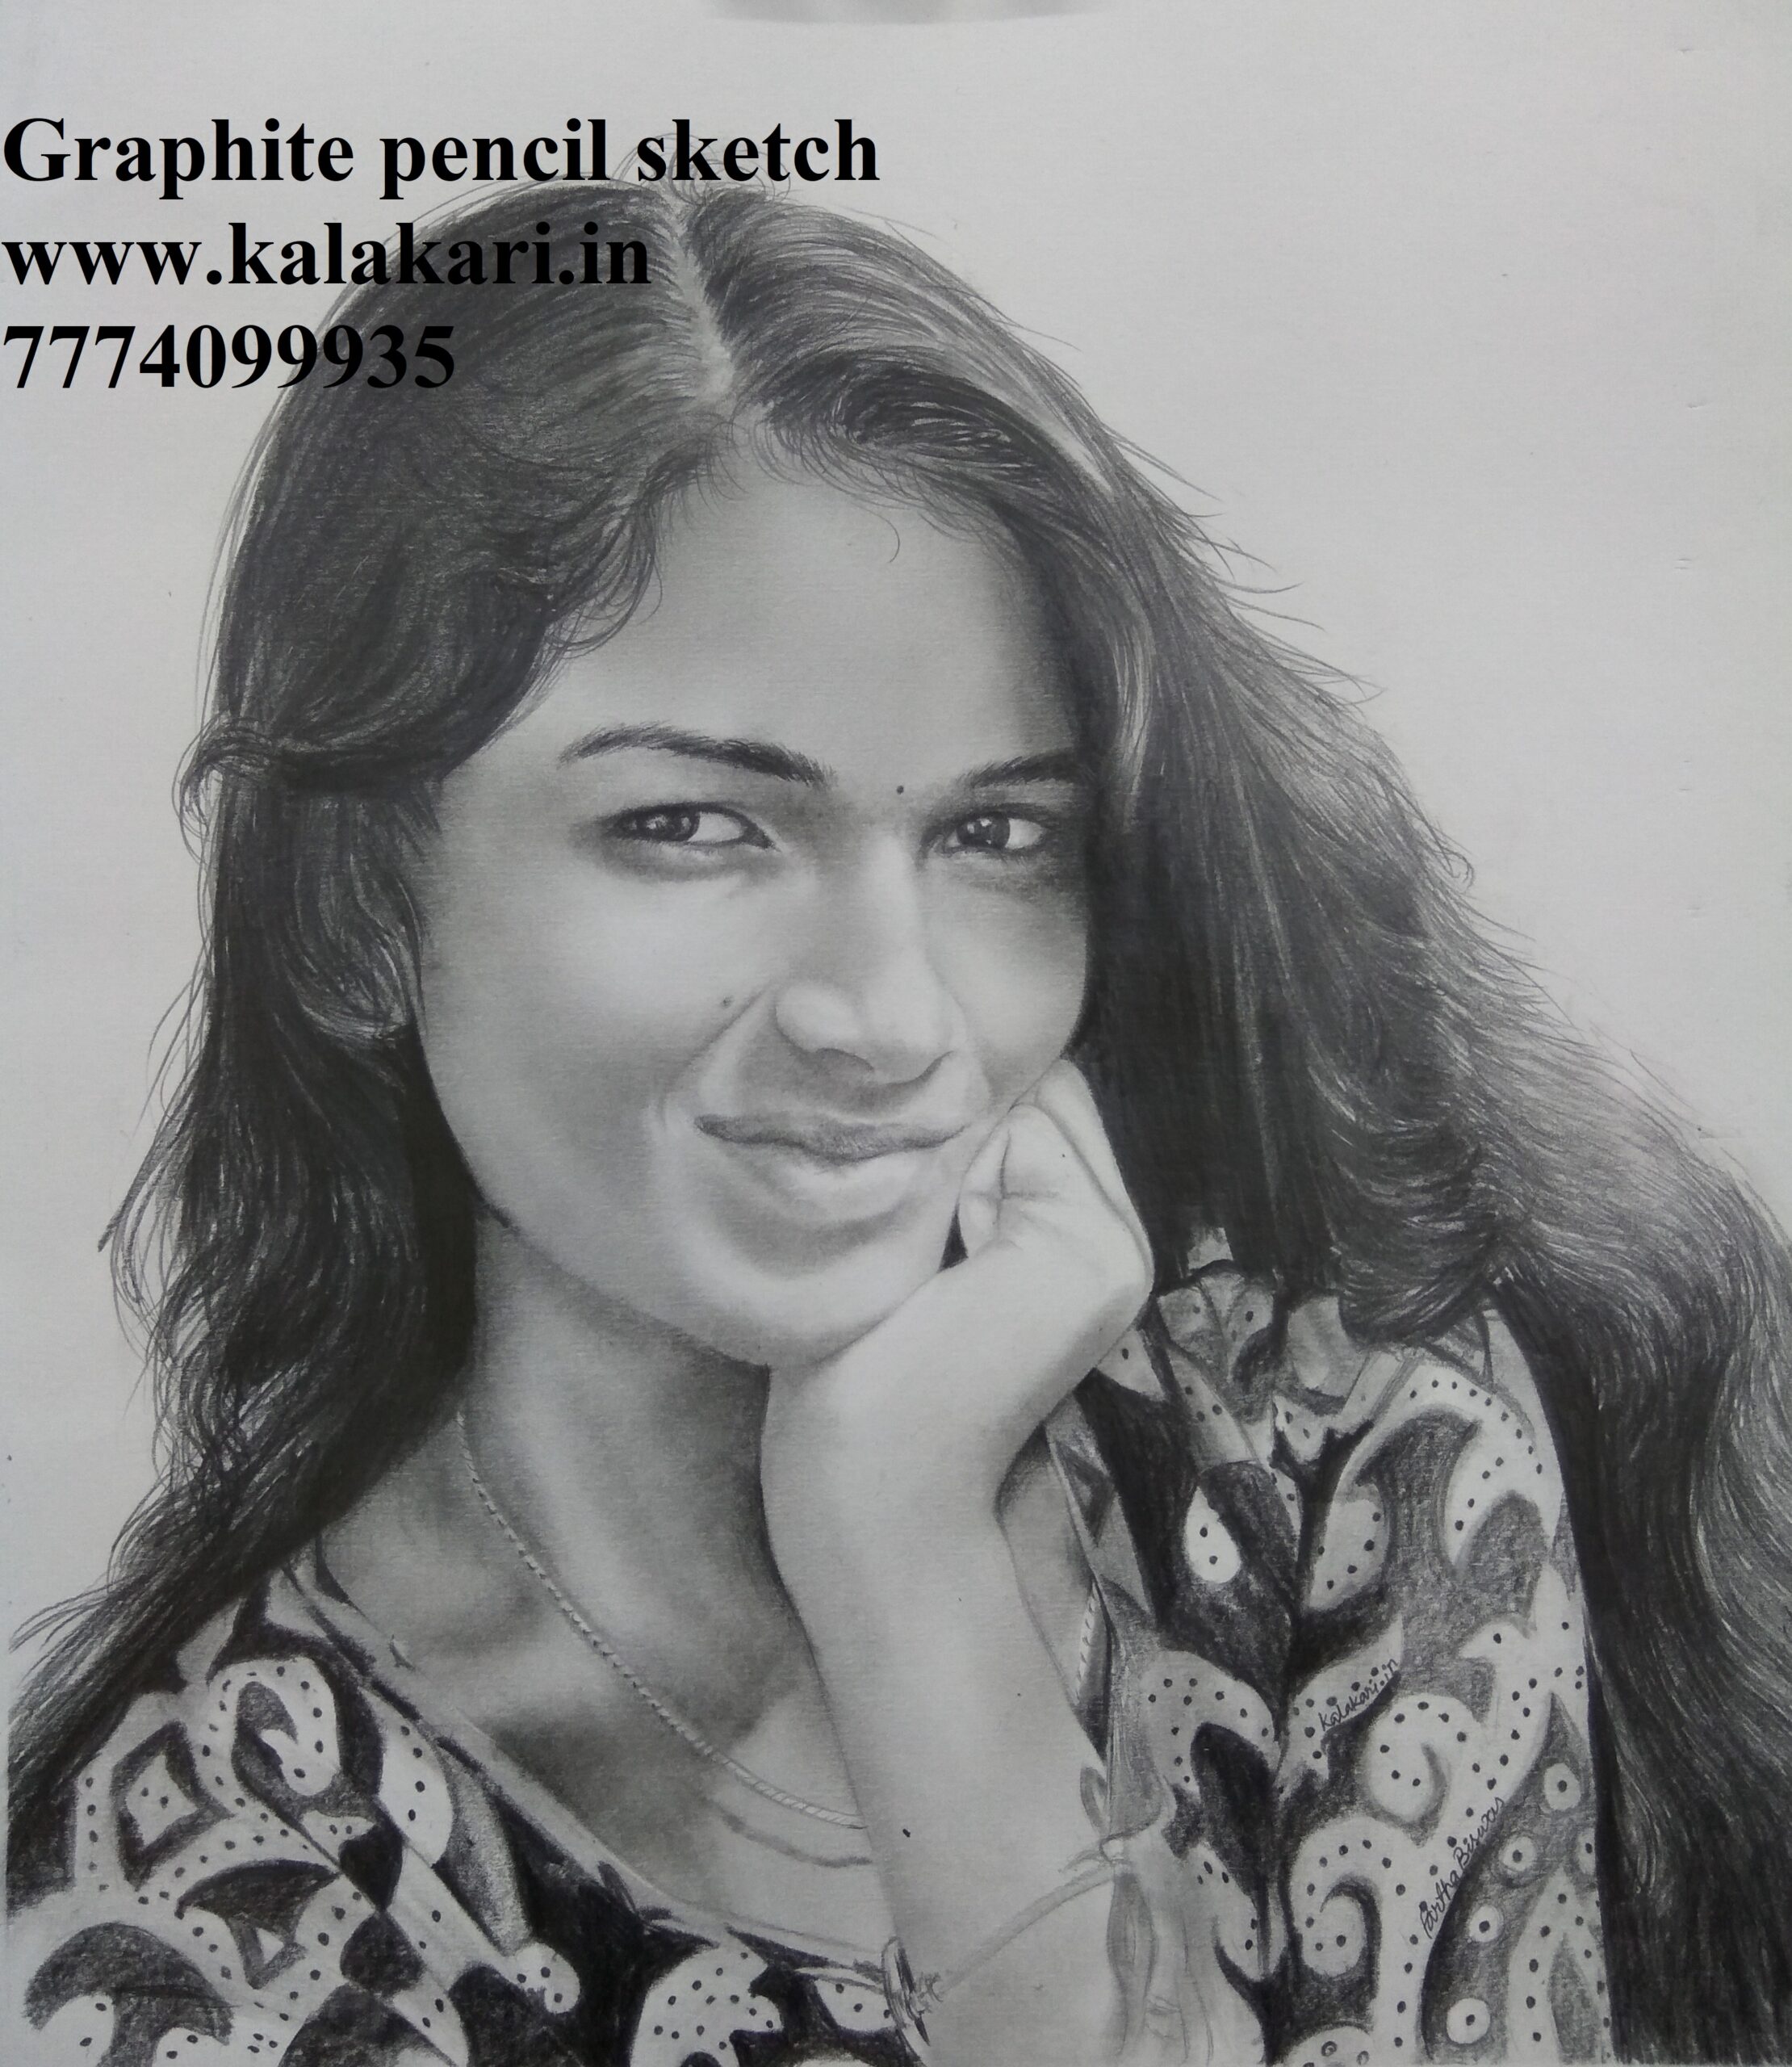 Girl drawing with hat pencil sketch | Girl drawing, Drawings, Pencil sketch-anthinhphatland.vn